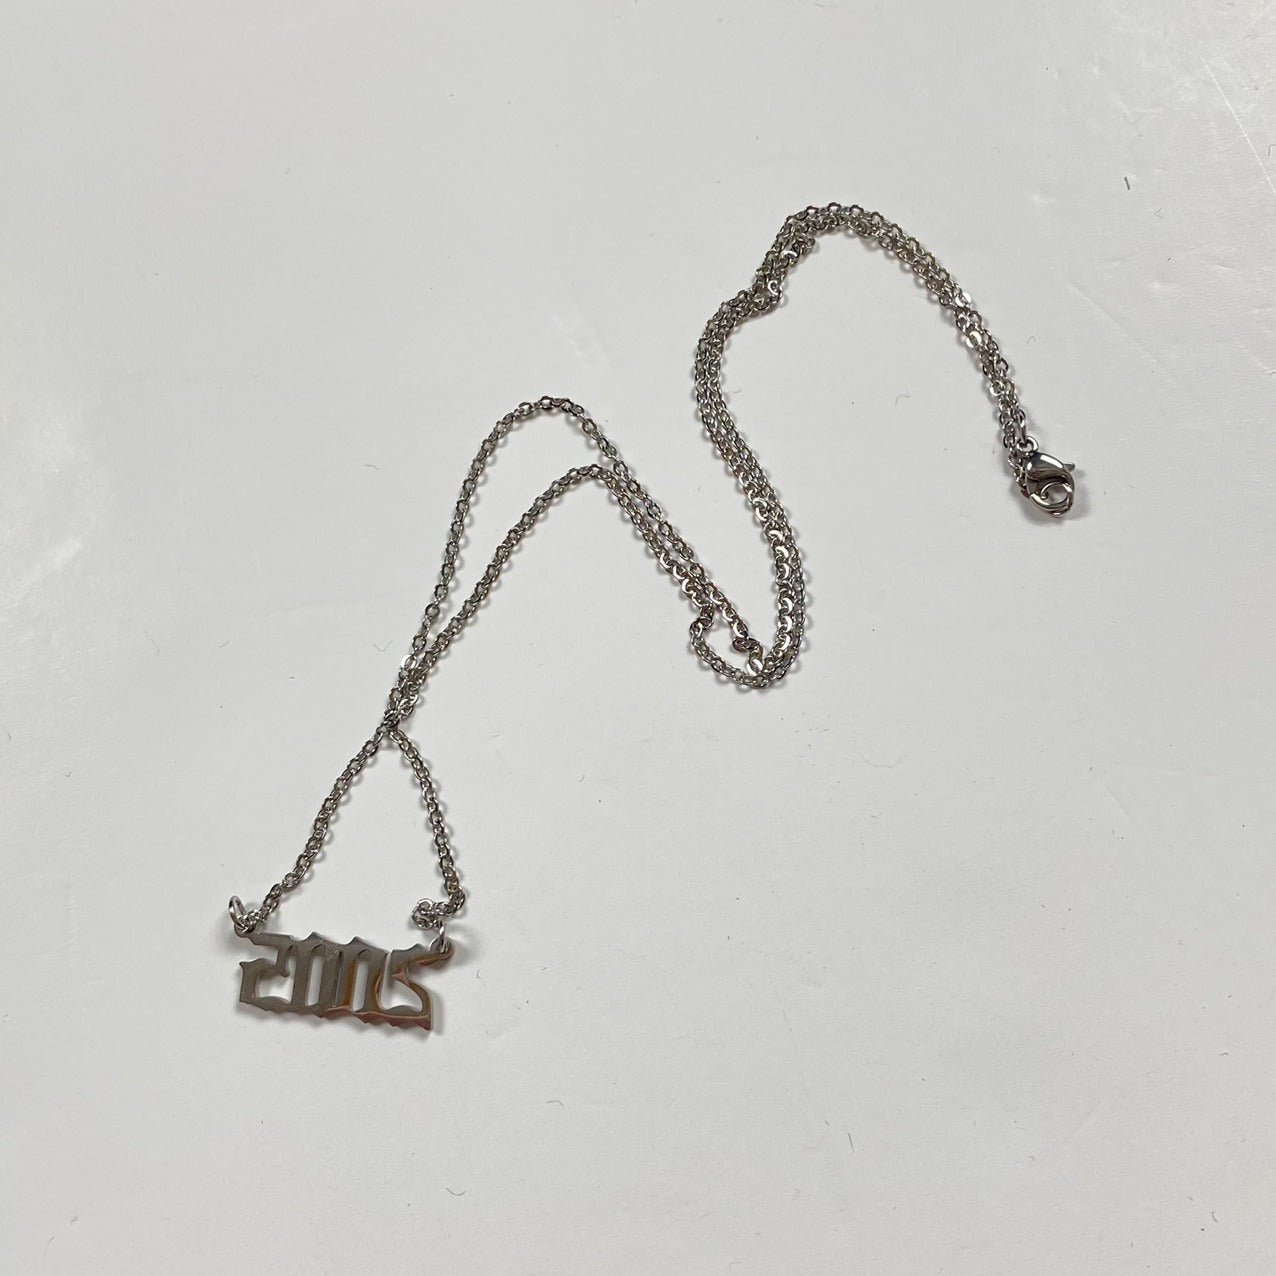 2005 Birth Year Necklace Chain Silver